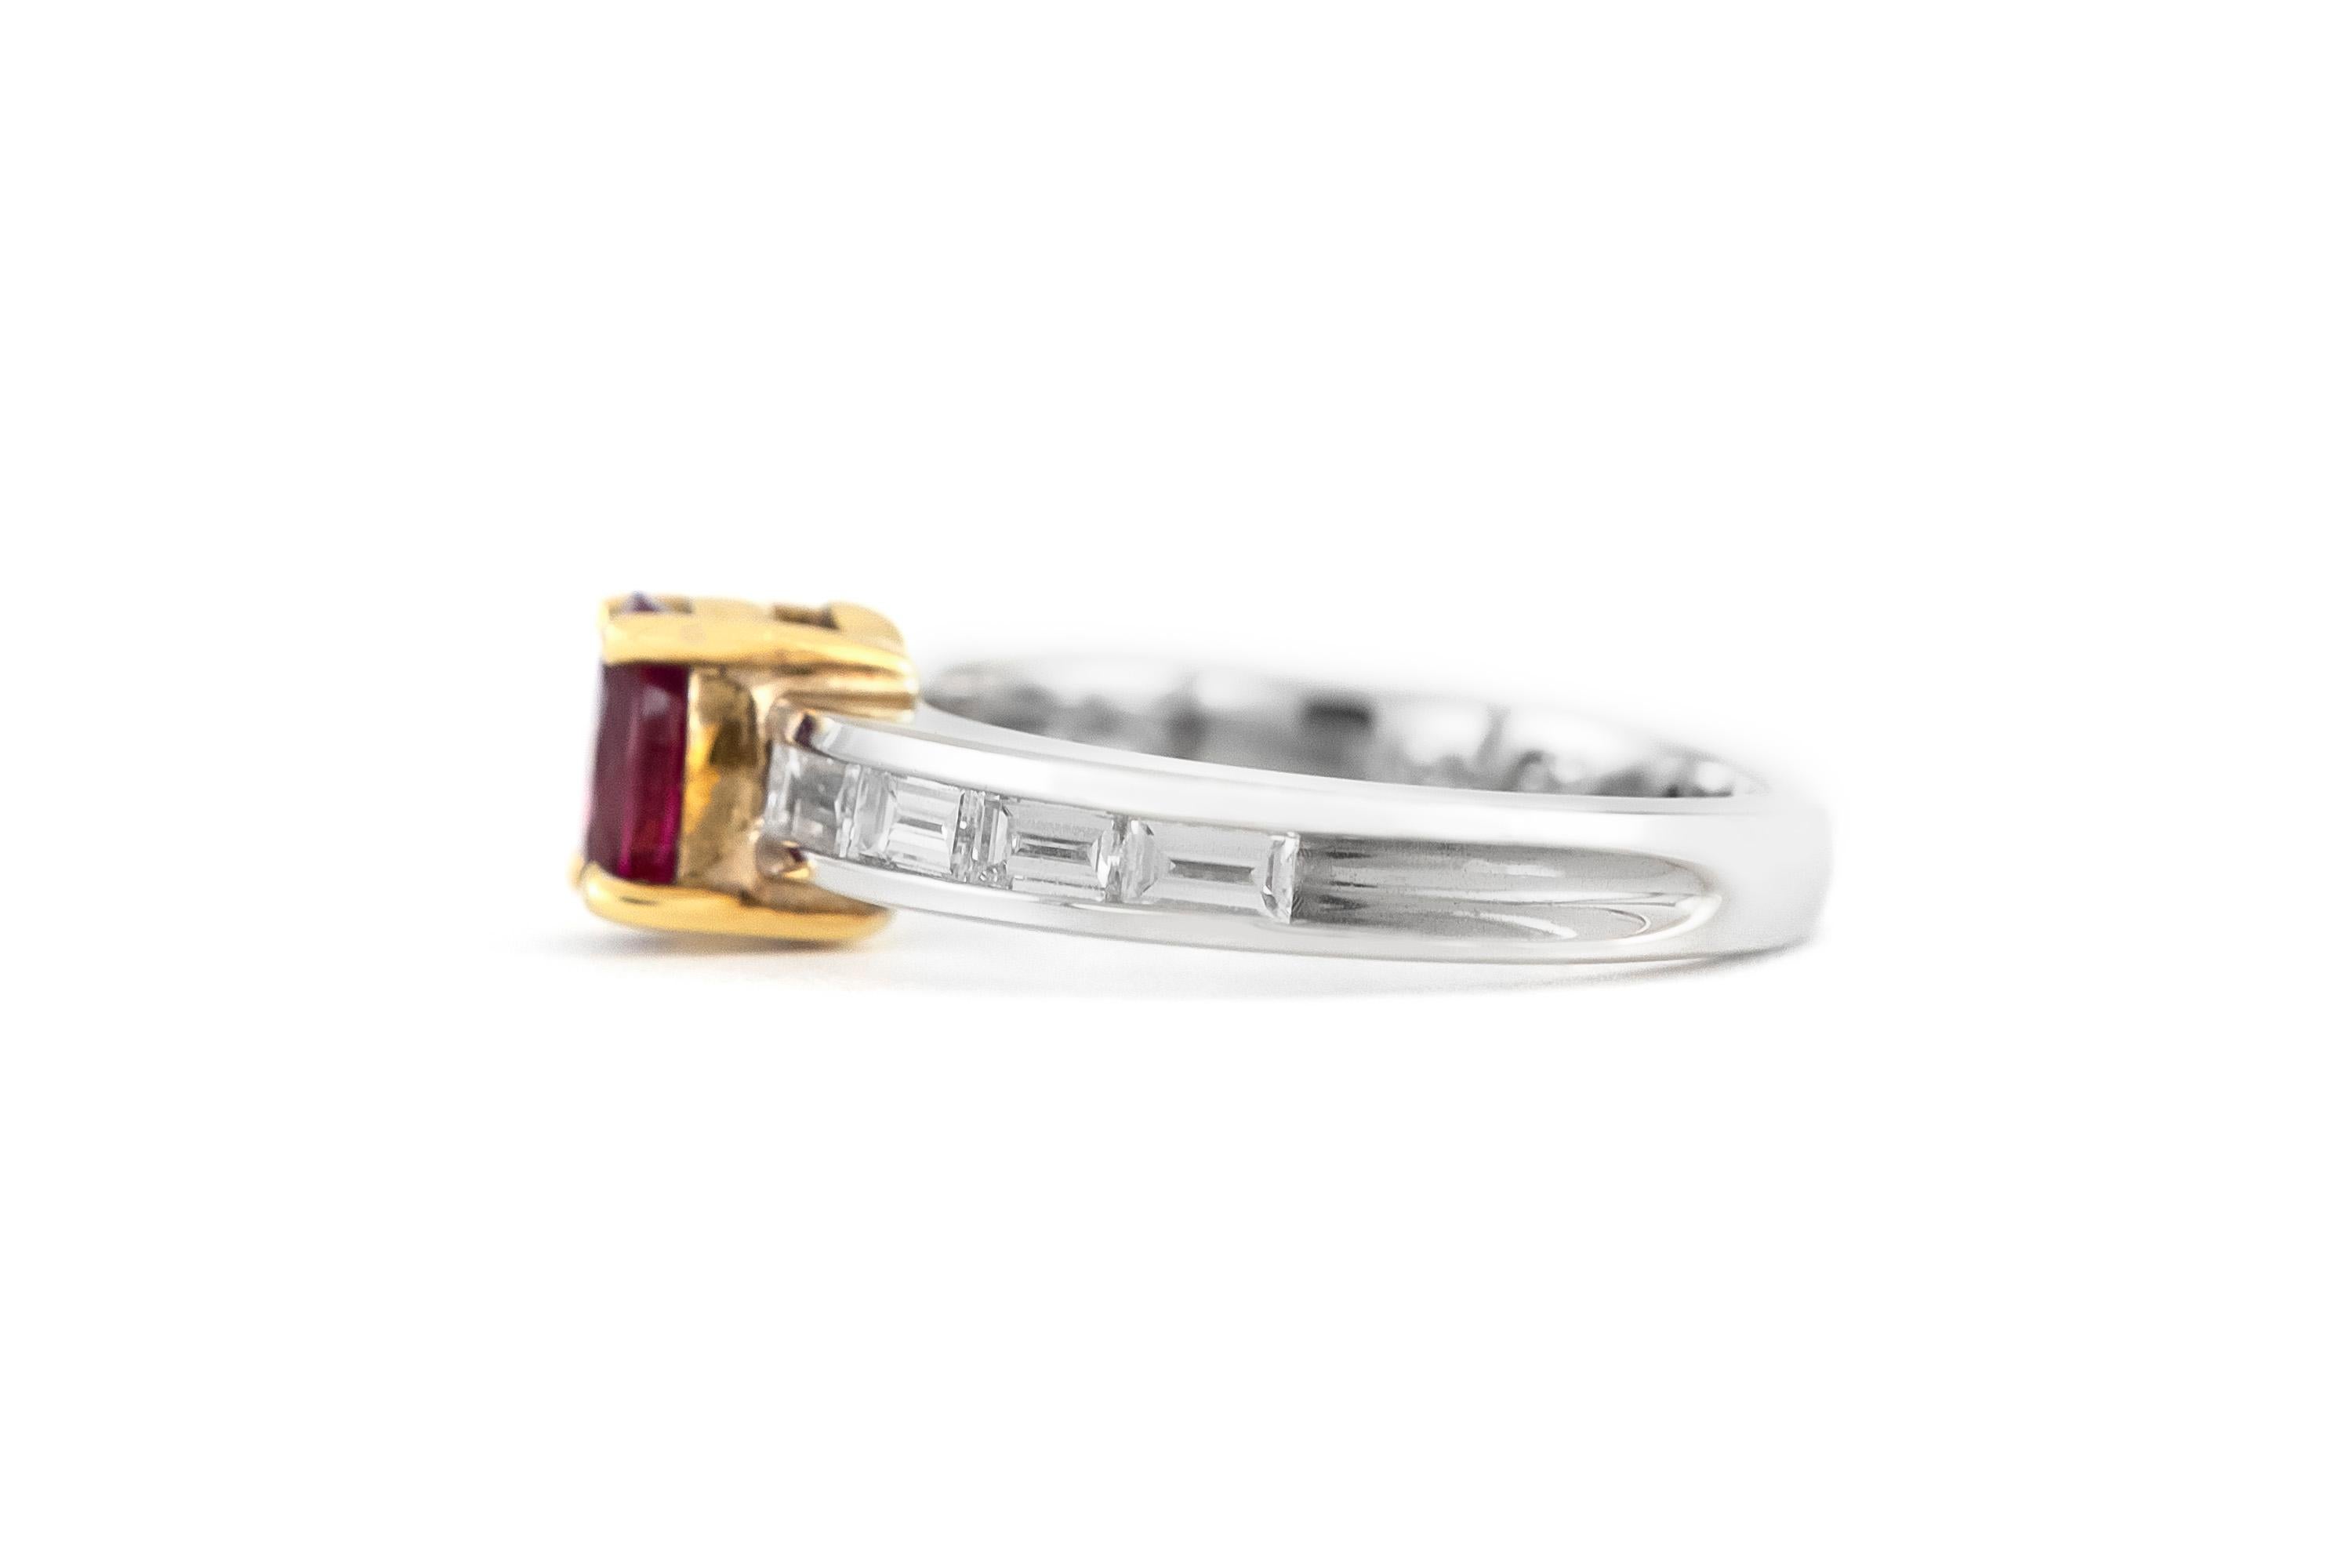 The ring is finely crafted in 18k white gold with center stone oval cut ruby weighing approximately total of 0.60 carat and diamonds weighing approximately total of 0.80 carat.
Circa 1970.